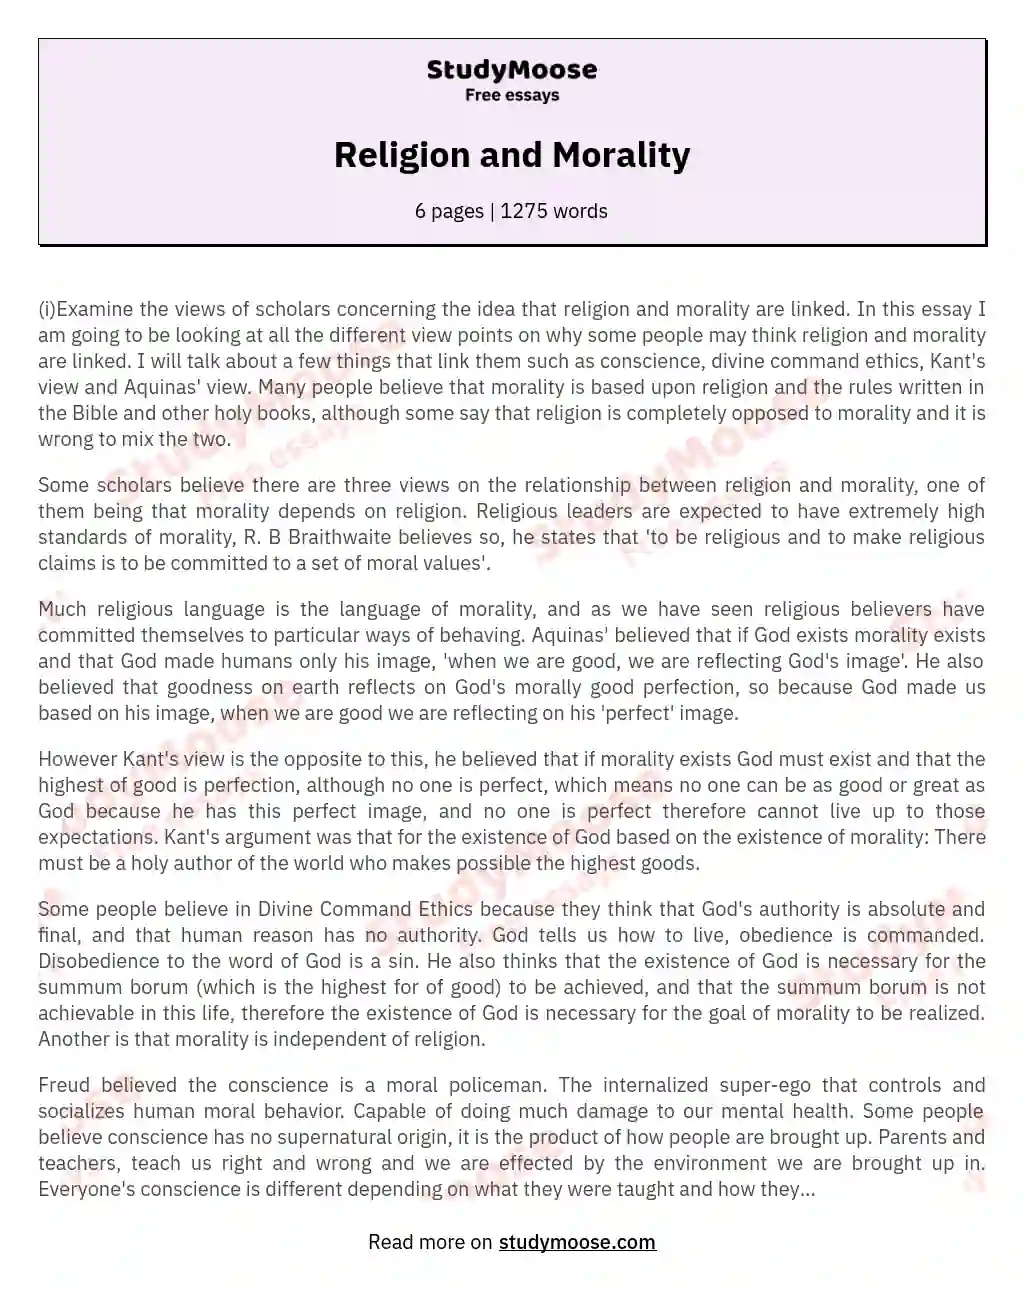 Religion and Morality essay